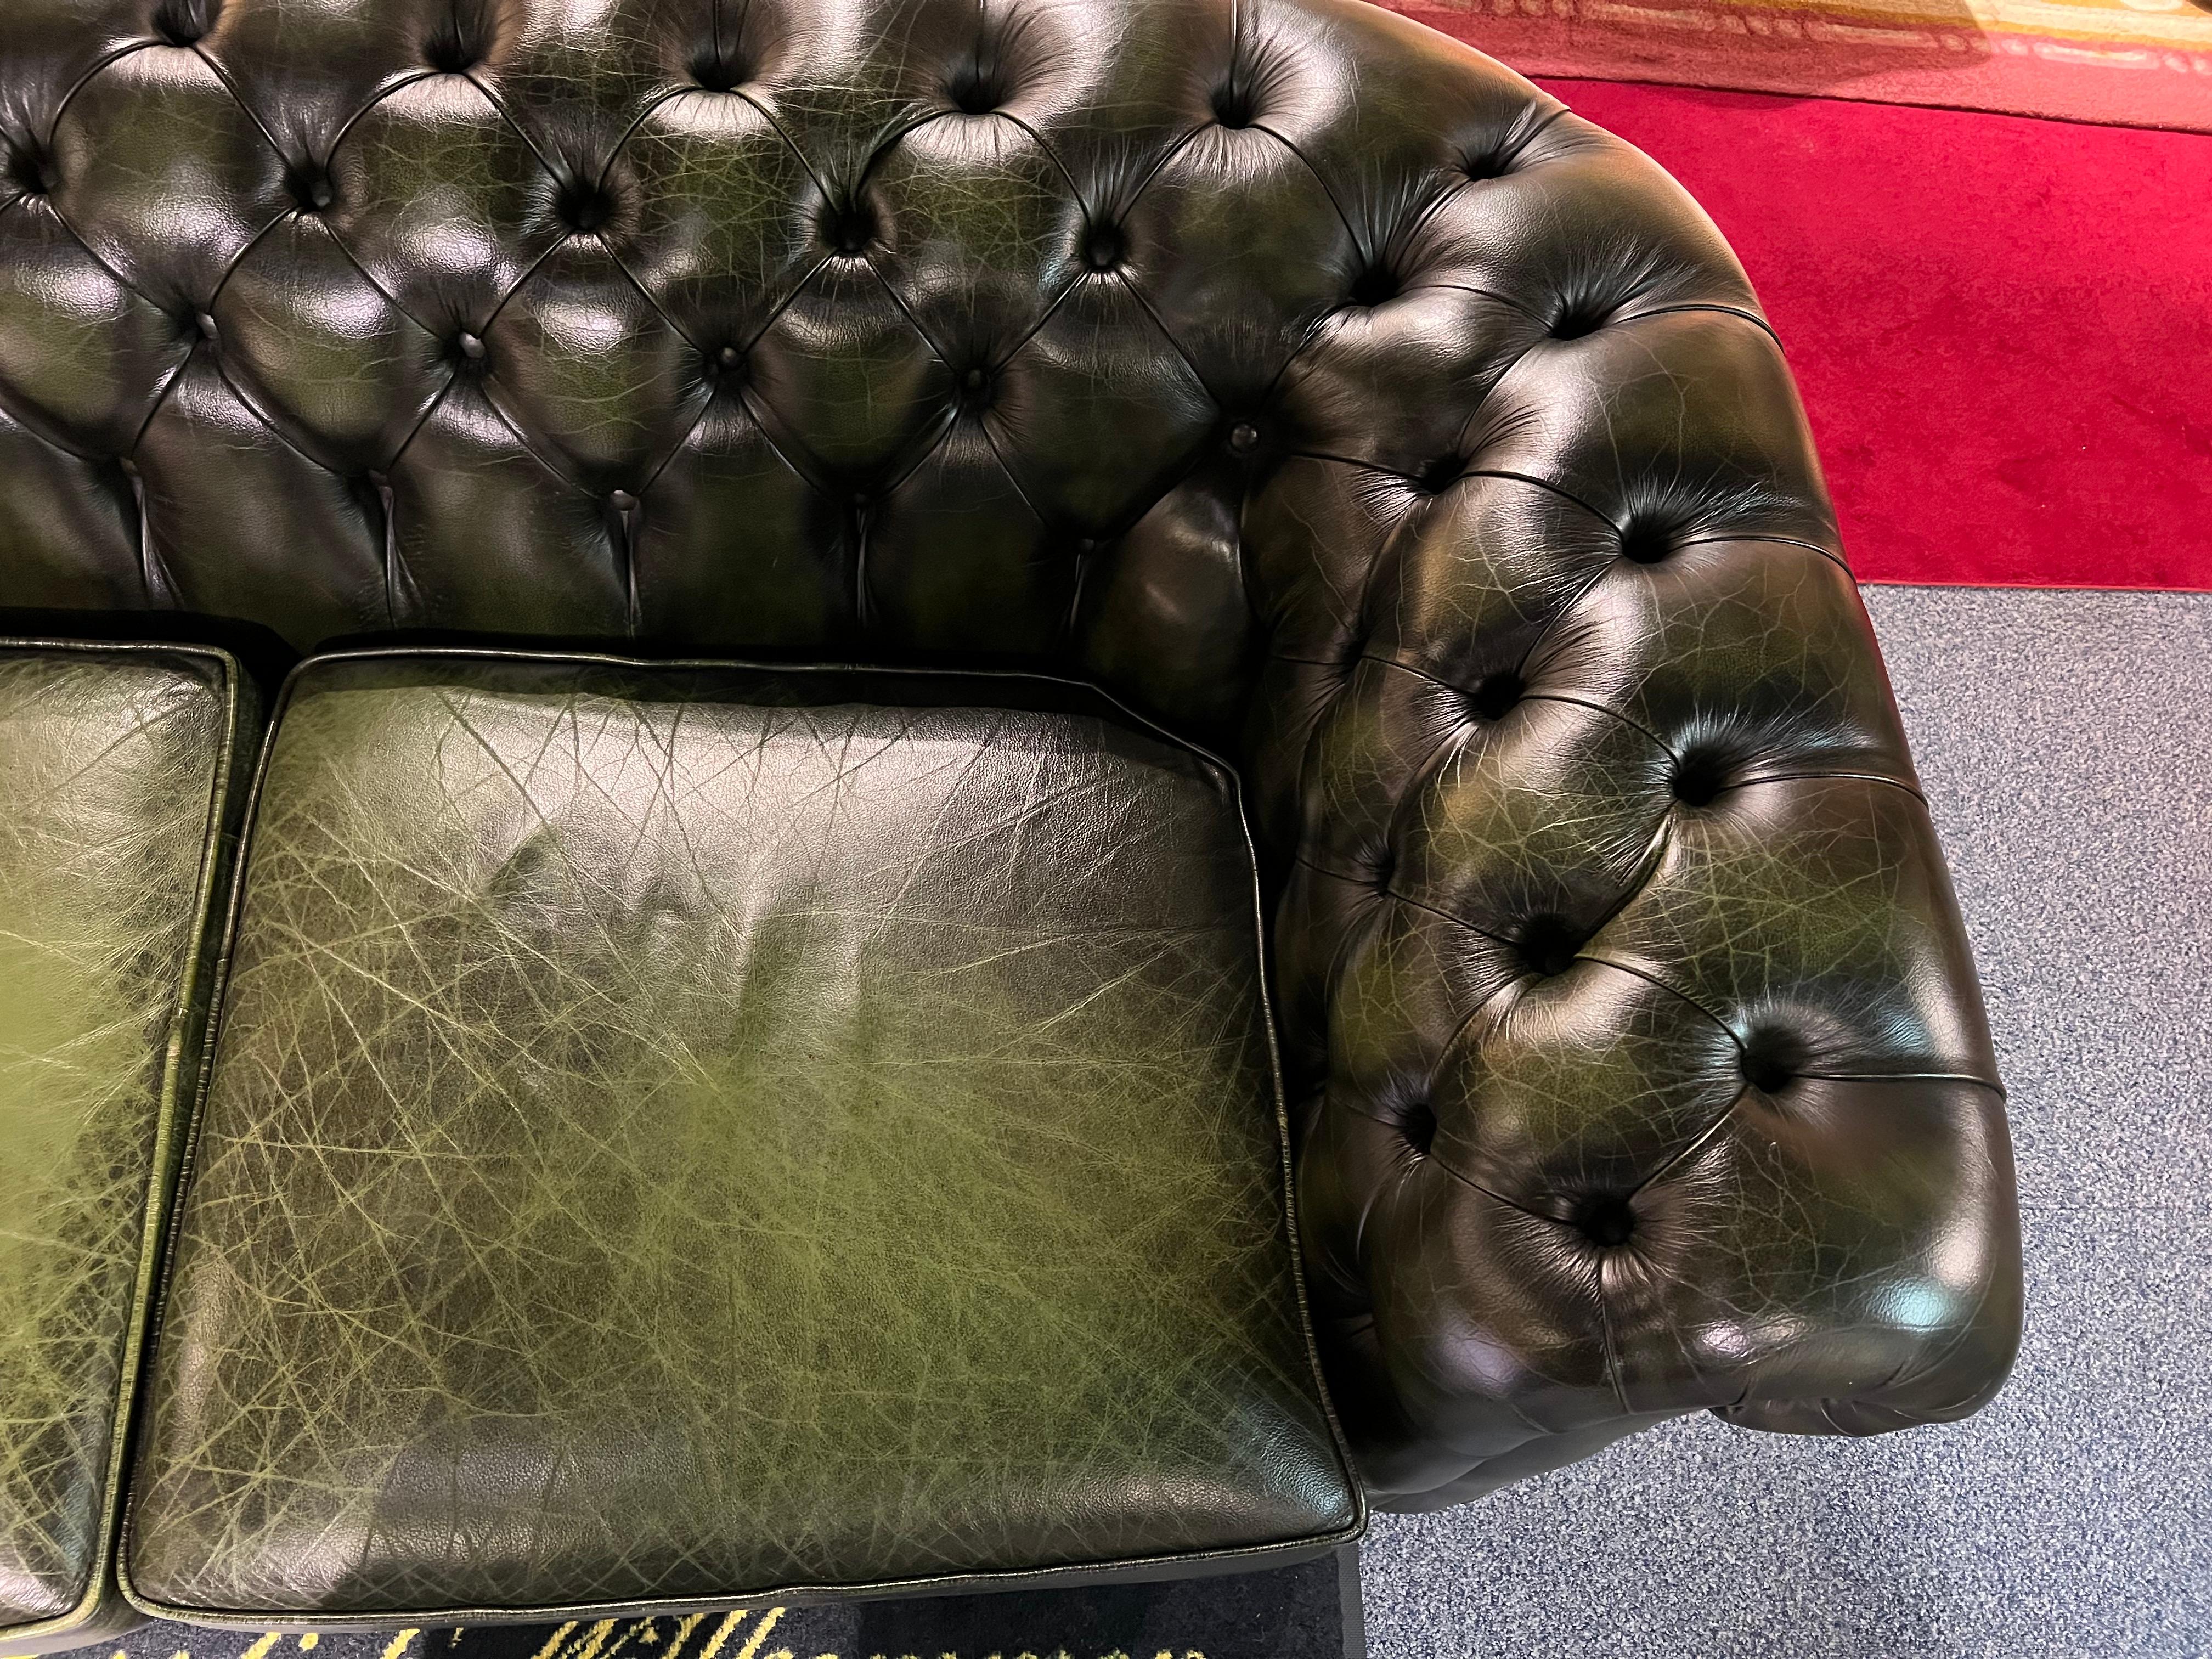 green leather chesterfield sofa